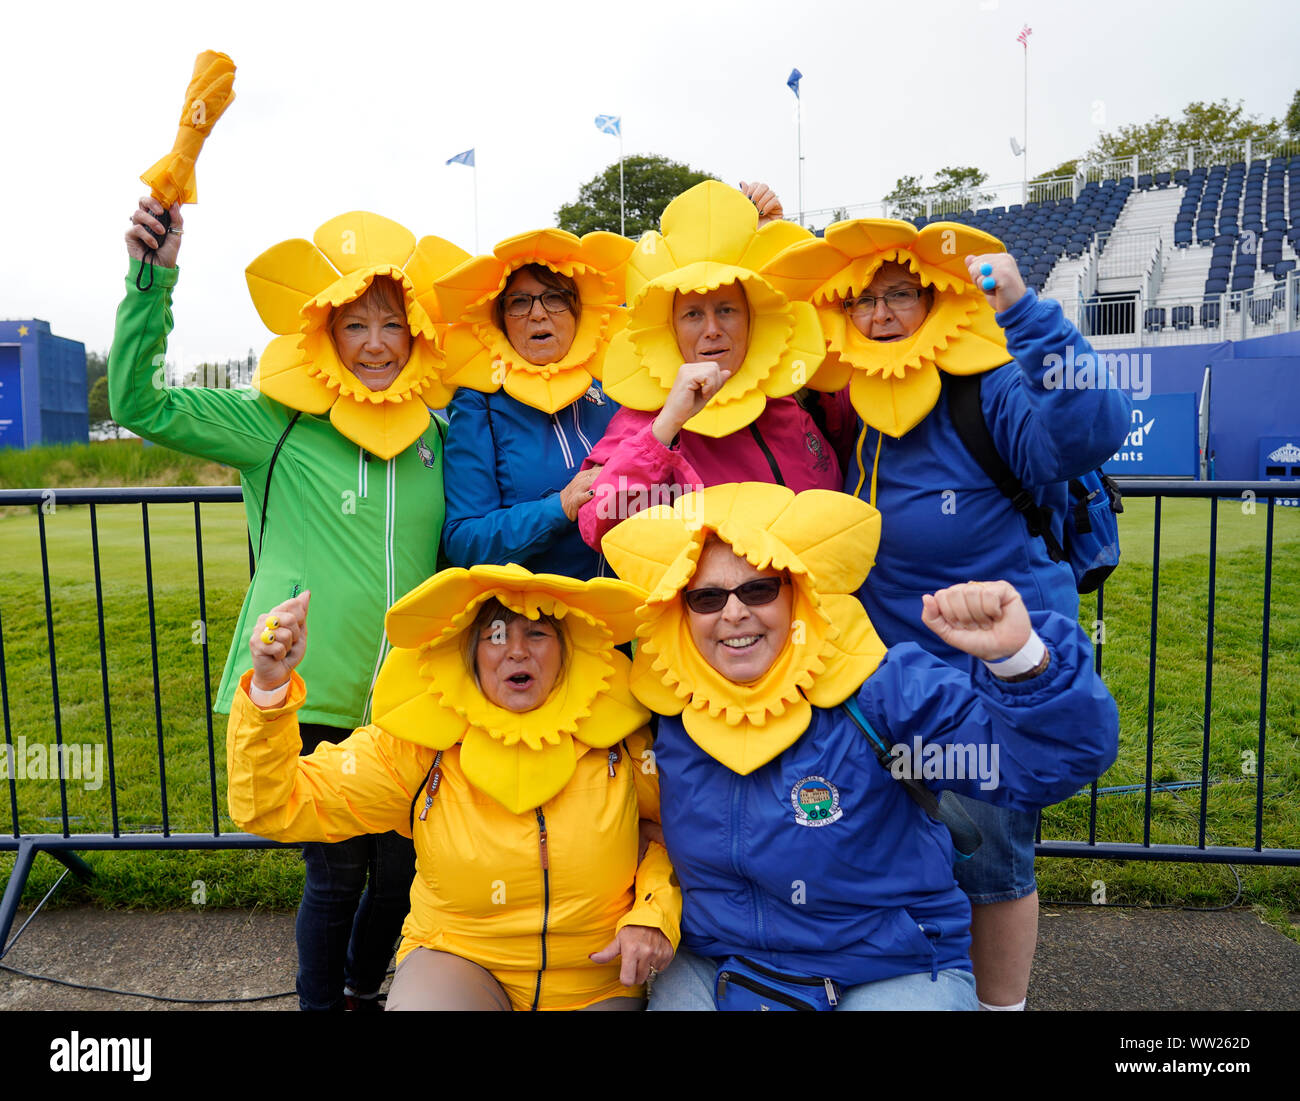 Auchterarder, Scotland, UK. 12 September 2019. Final practice day for the 2019 Solheim Cup before the official opening saw many patriotic fans arrive on the course at Gleneagles. Pictured; Welsh Team Europe women fans from Merthyr Tydfil in daffodil fancy dress. Iain Masterton/Alamy Live News Stock Photo